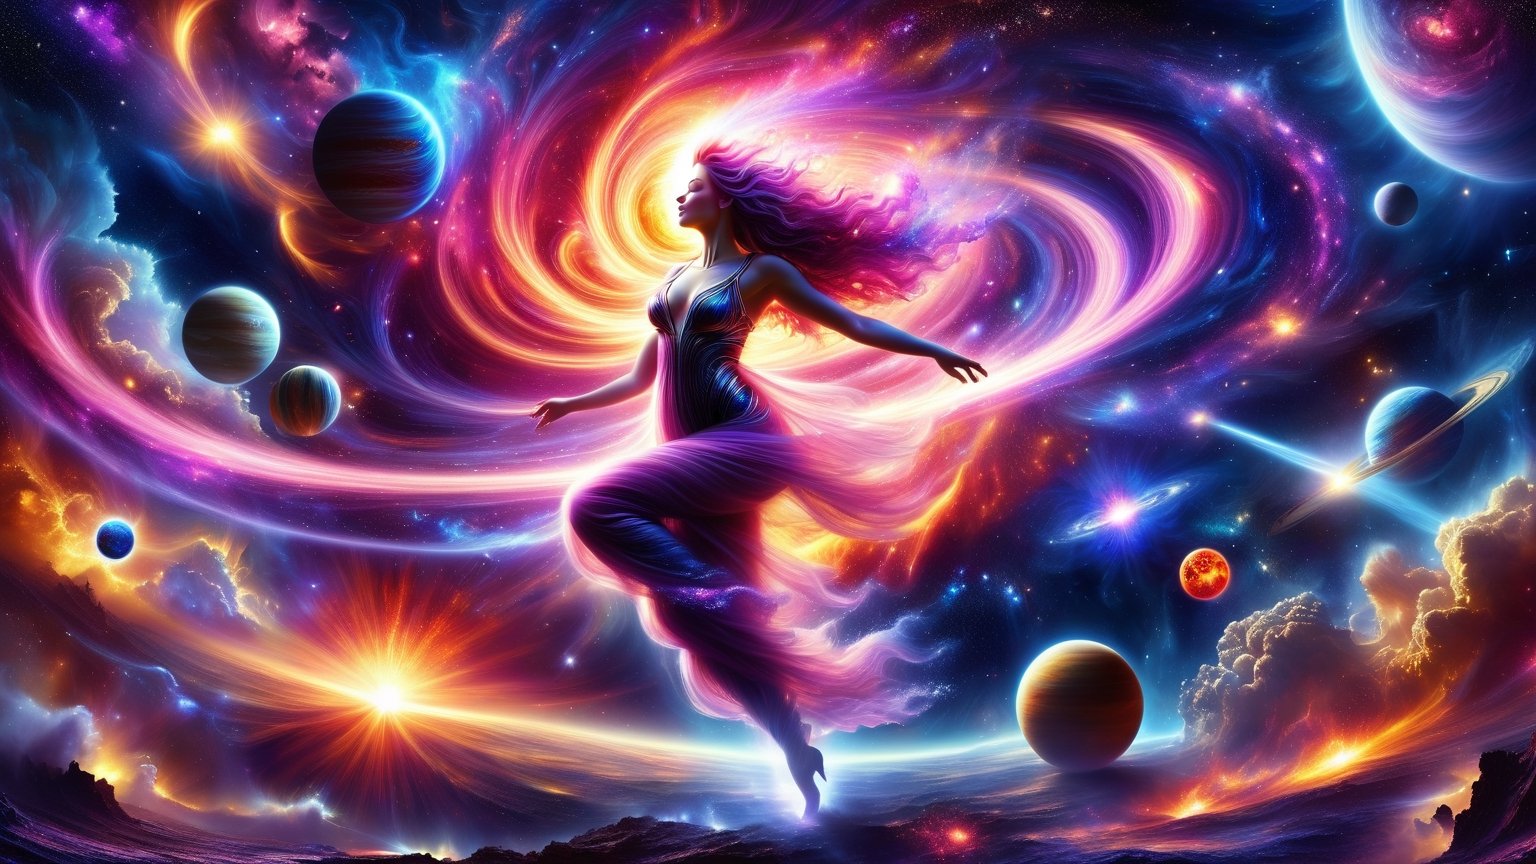 a goddess playing with planets, HDR photo of deep Space-themed Hyperrealistic art cinematic
photo, ethereal fantasy concept art, background blending
nebulae shimmering in deep midnight blues, red and purples
with streaks of starlight. Cosmic, celestial, stars, nebulas, many
planets, science fiction, highly detailed, colorful clouds in deep
cosmic dreamscape, colorfull nebula, big vortex sucking planets, black hole, planets on fire, astral projection, constelations, Witness the grandeur of a magic mystical space, nebula, galaxy formation, colorful many big planets and stars, intricate details,  colorful clouds and planets, hyperrealistic photography,  8k, blue and pink,  nighttime,  ultra dark theme, detailmaster2,  DonMChr0m4t3rr4XL ,DonMChr0m4t3rr4XL ,DonM3l3m3nt4lXL,DonMV01dfm4g1c3XL ,DonMC3l3st14l3xpl0r3rsXL,cyberpunk style,aicc,DonMM1y4XL